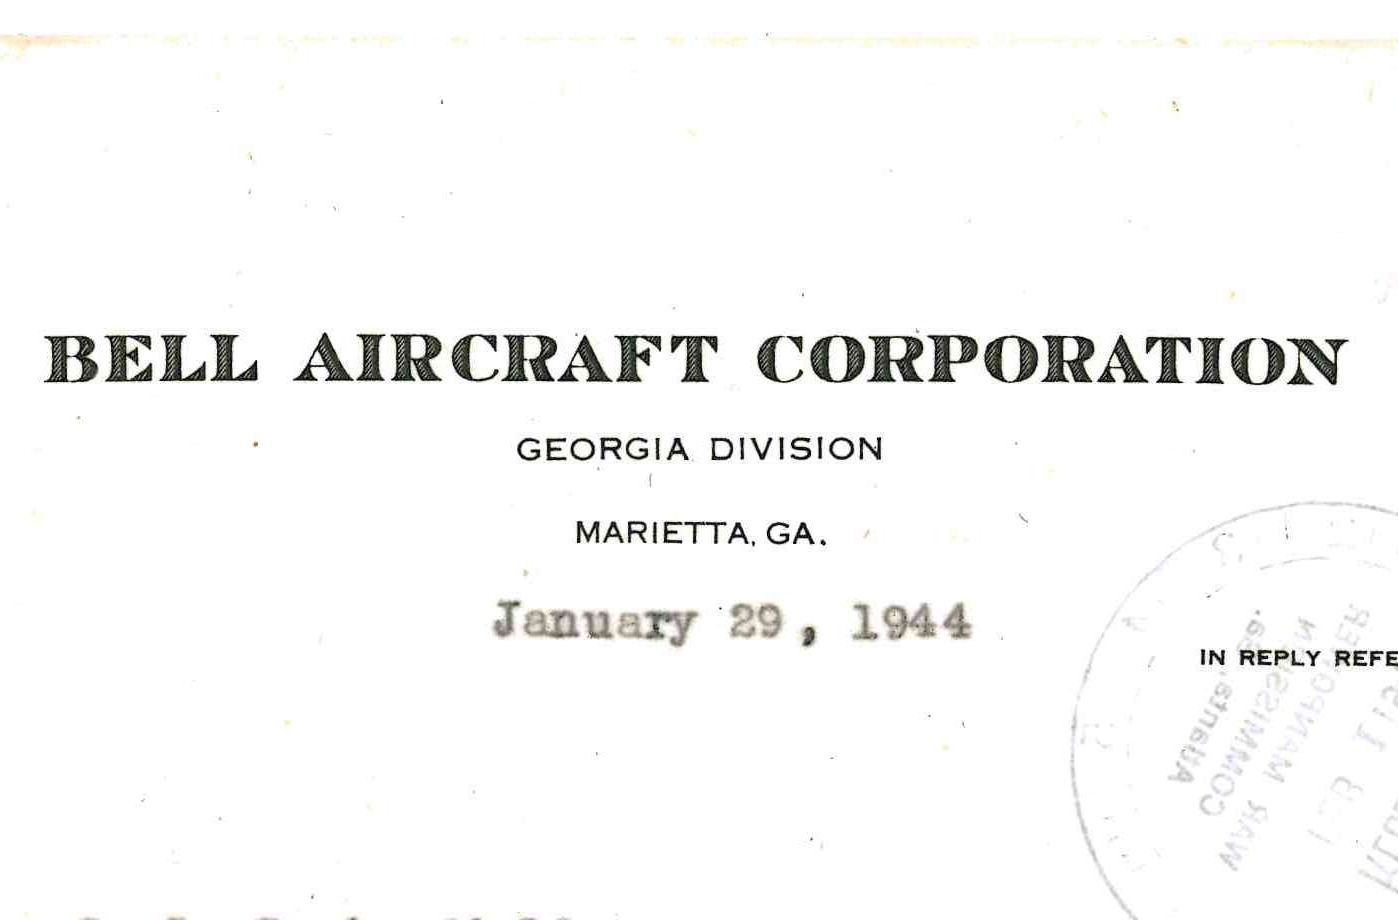 Letter from Bell Aircraft Corporation